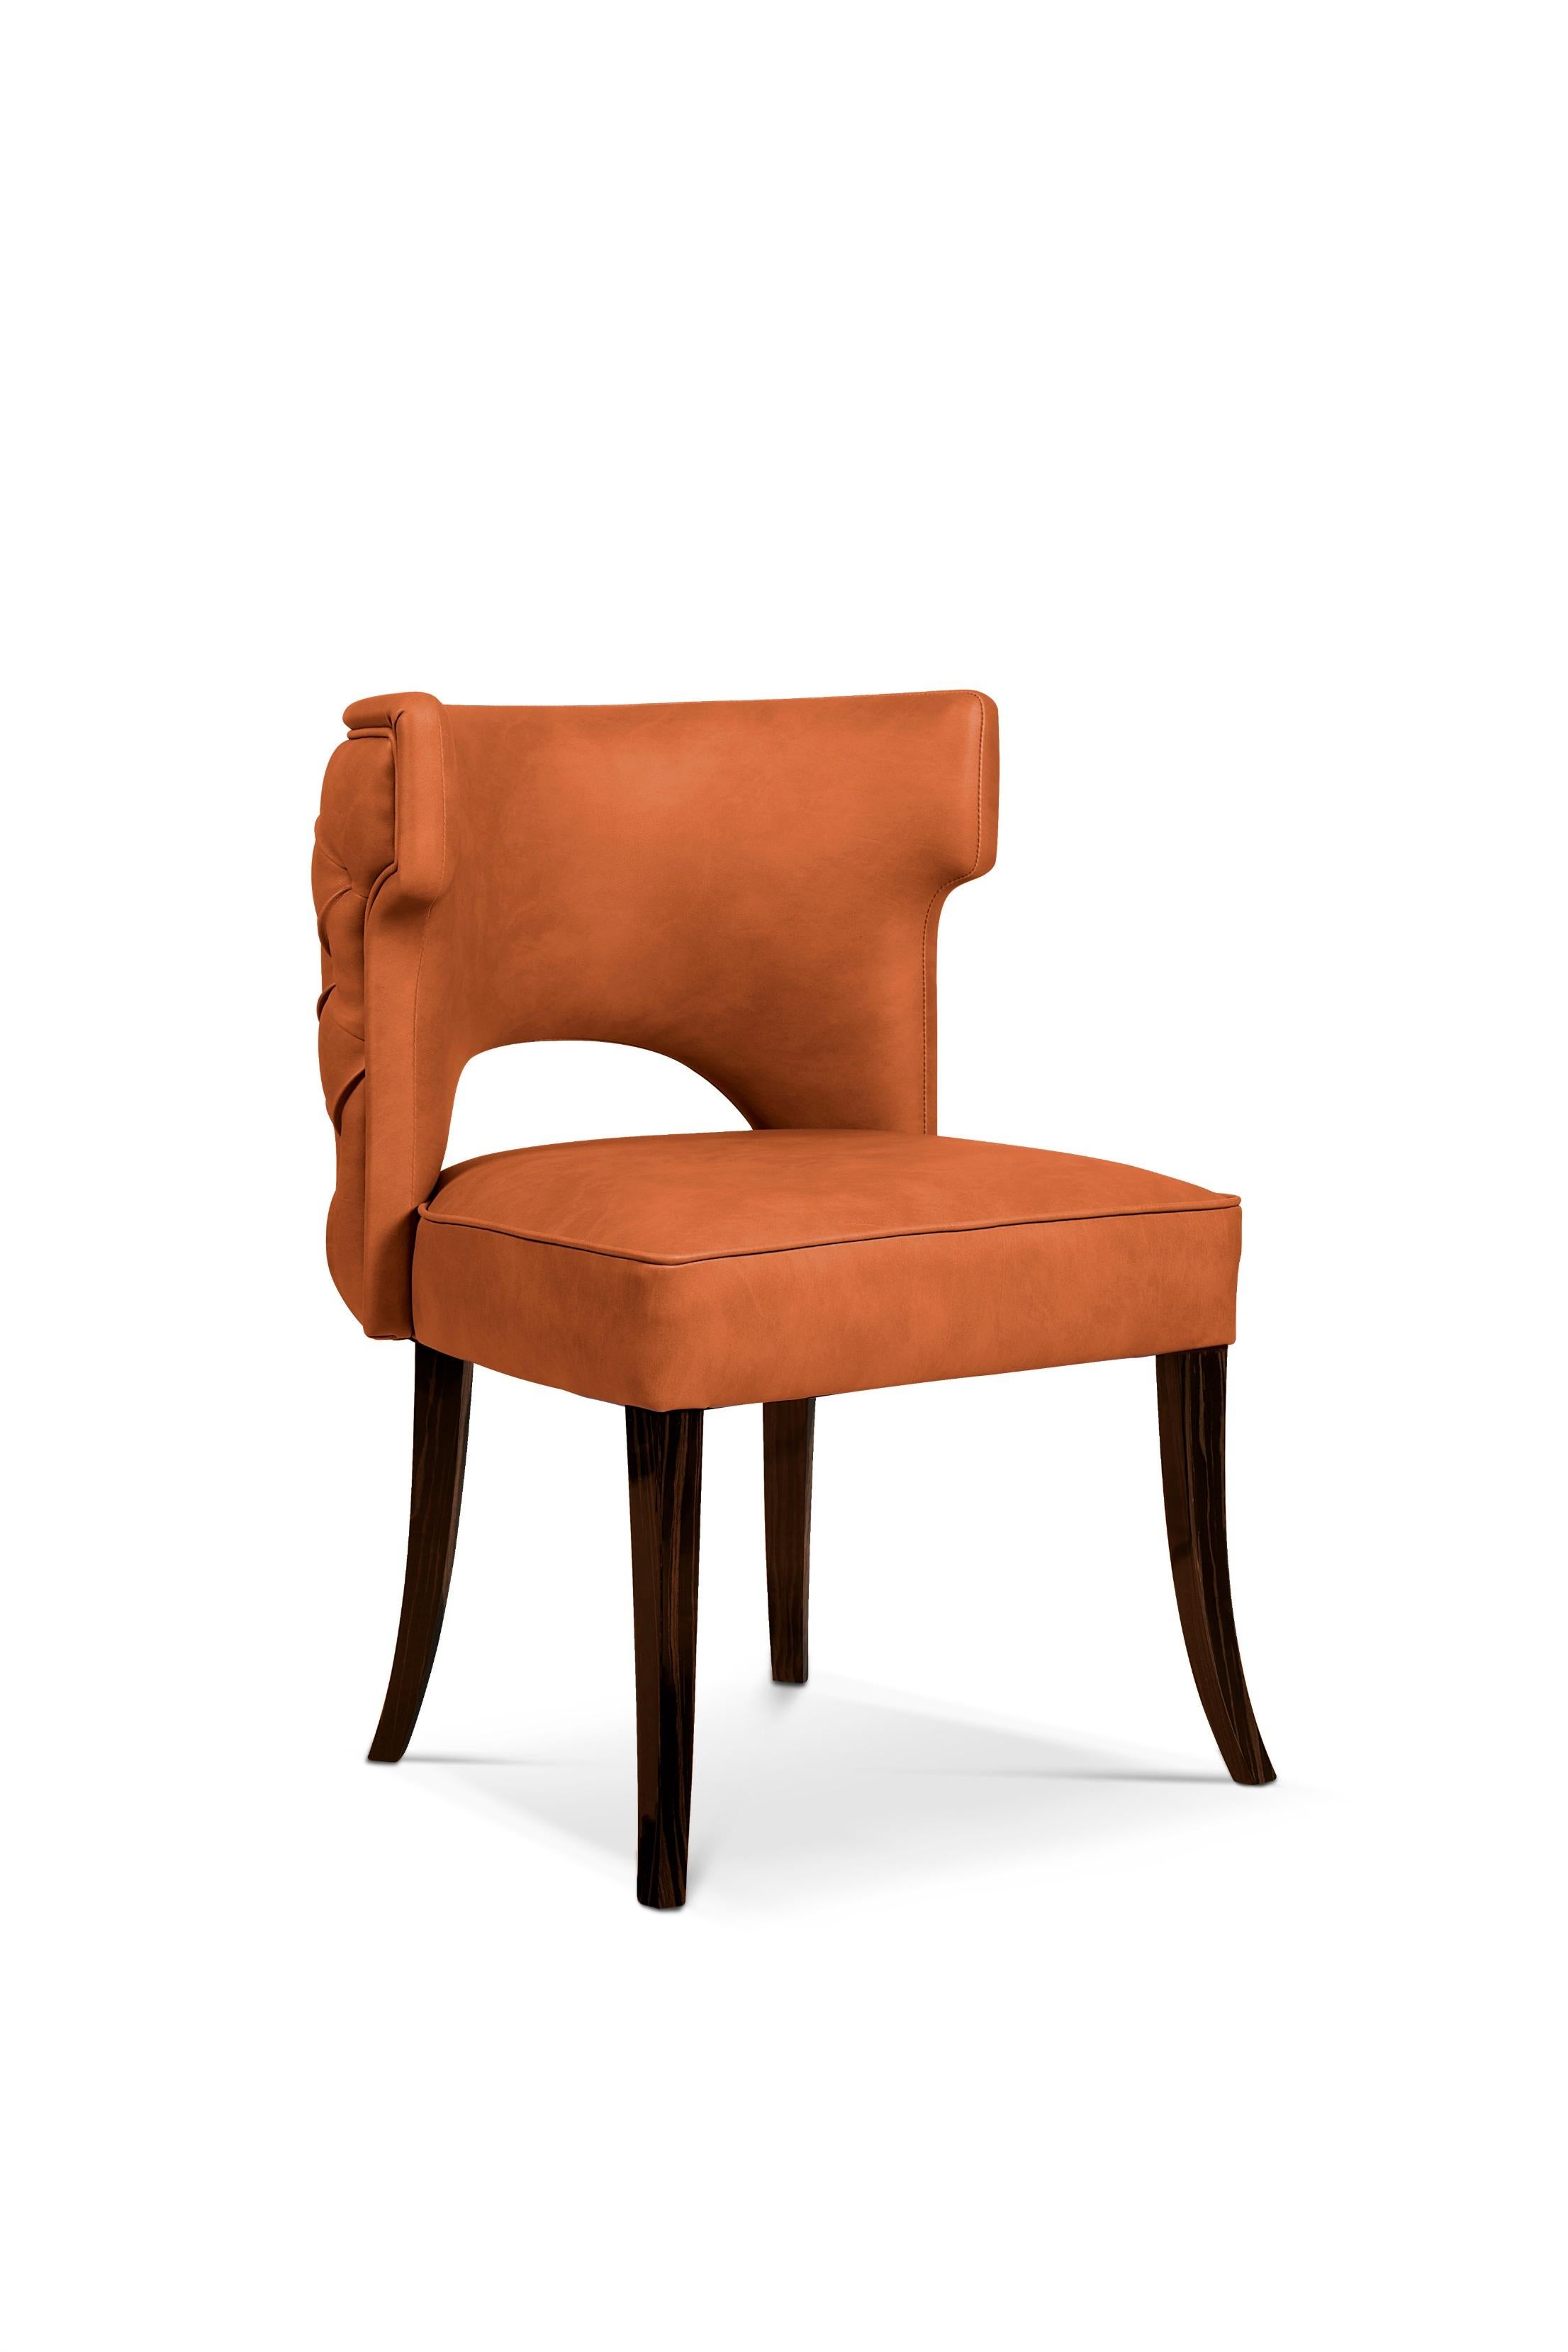 Each Spring, from 1866-1885, cowboys drove from Texas to railheads in Kansas. Kansas dining chair is a tribute to their courage. This button-tufted back chair is upholstered in Faux Leather, making it the perfect dining room furniture